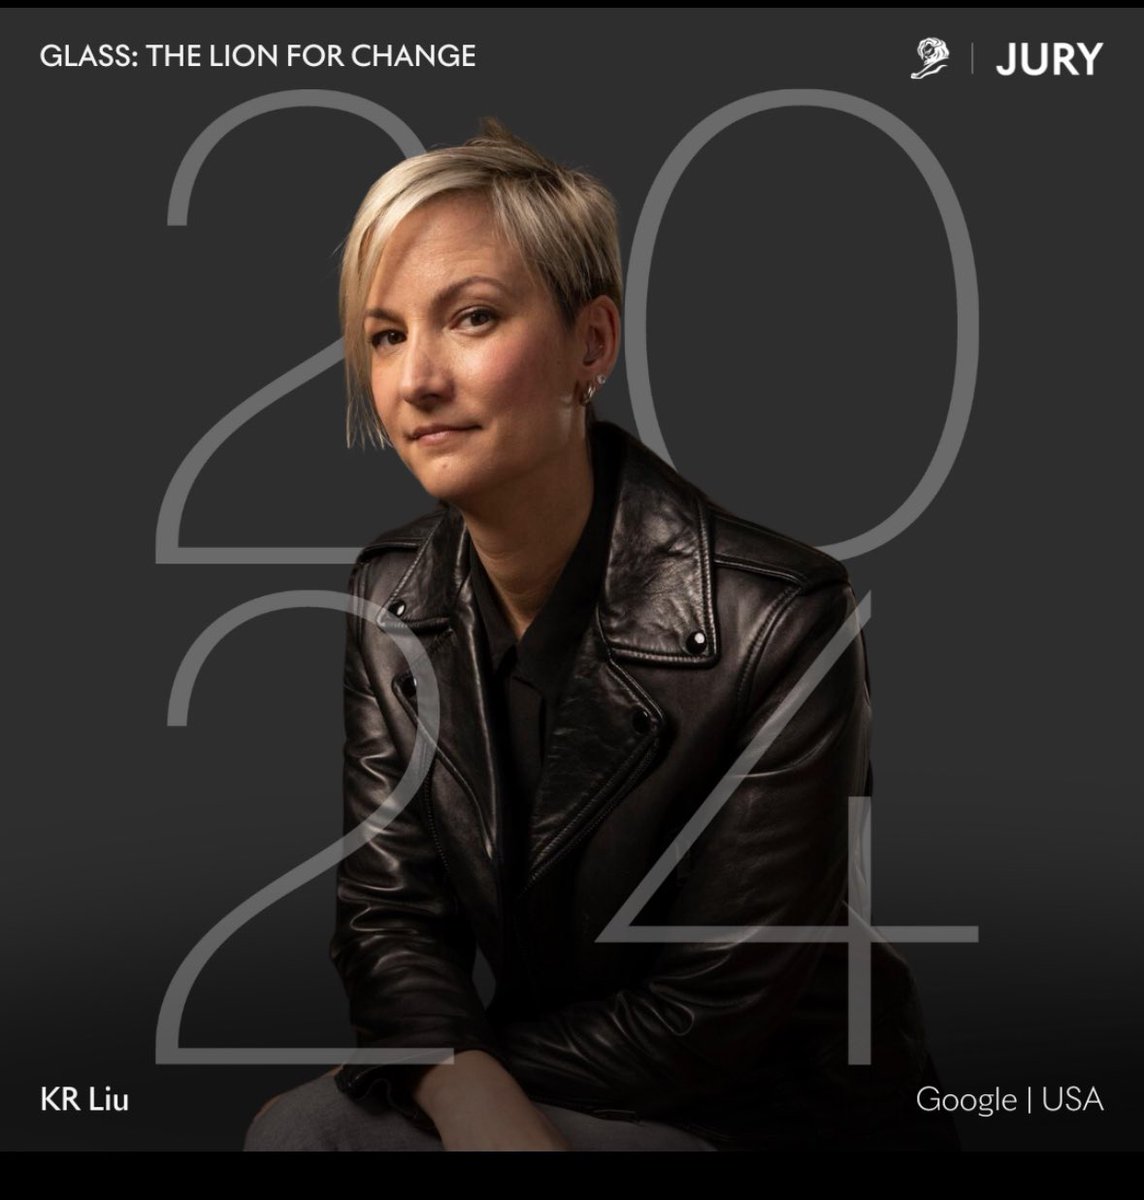 I'm delighted to announce I’ll be serving as a Juror for the Glass: The Lion for Change at @Cannes_Lions 2024 I can’t wait to bring my voice to the Jury room to assess the groundbreaking creativity that will set the creative benchmark for another year.
#CannesLions2024